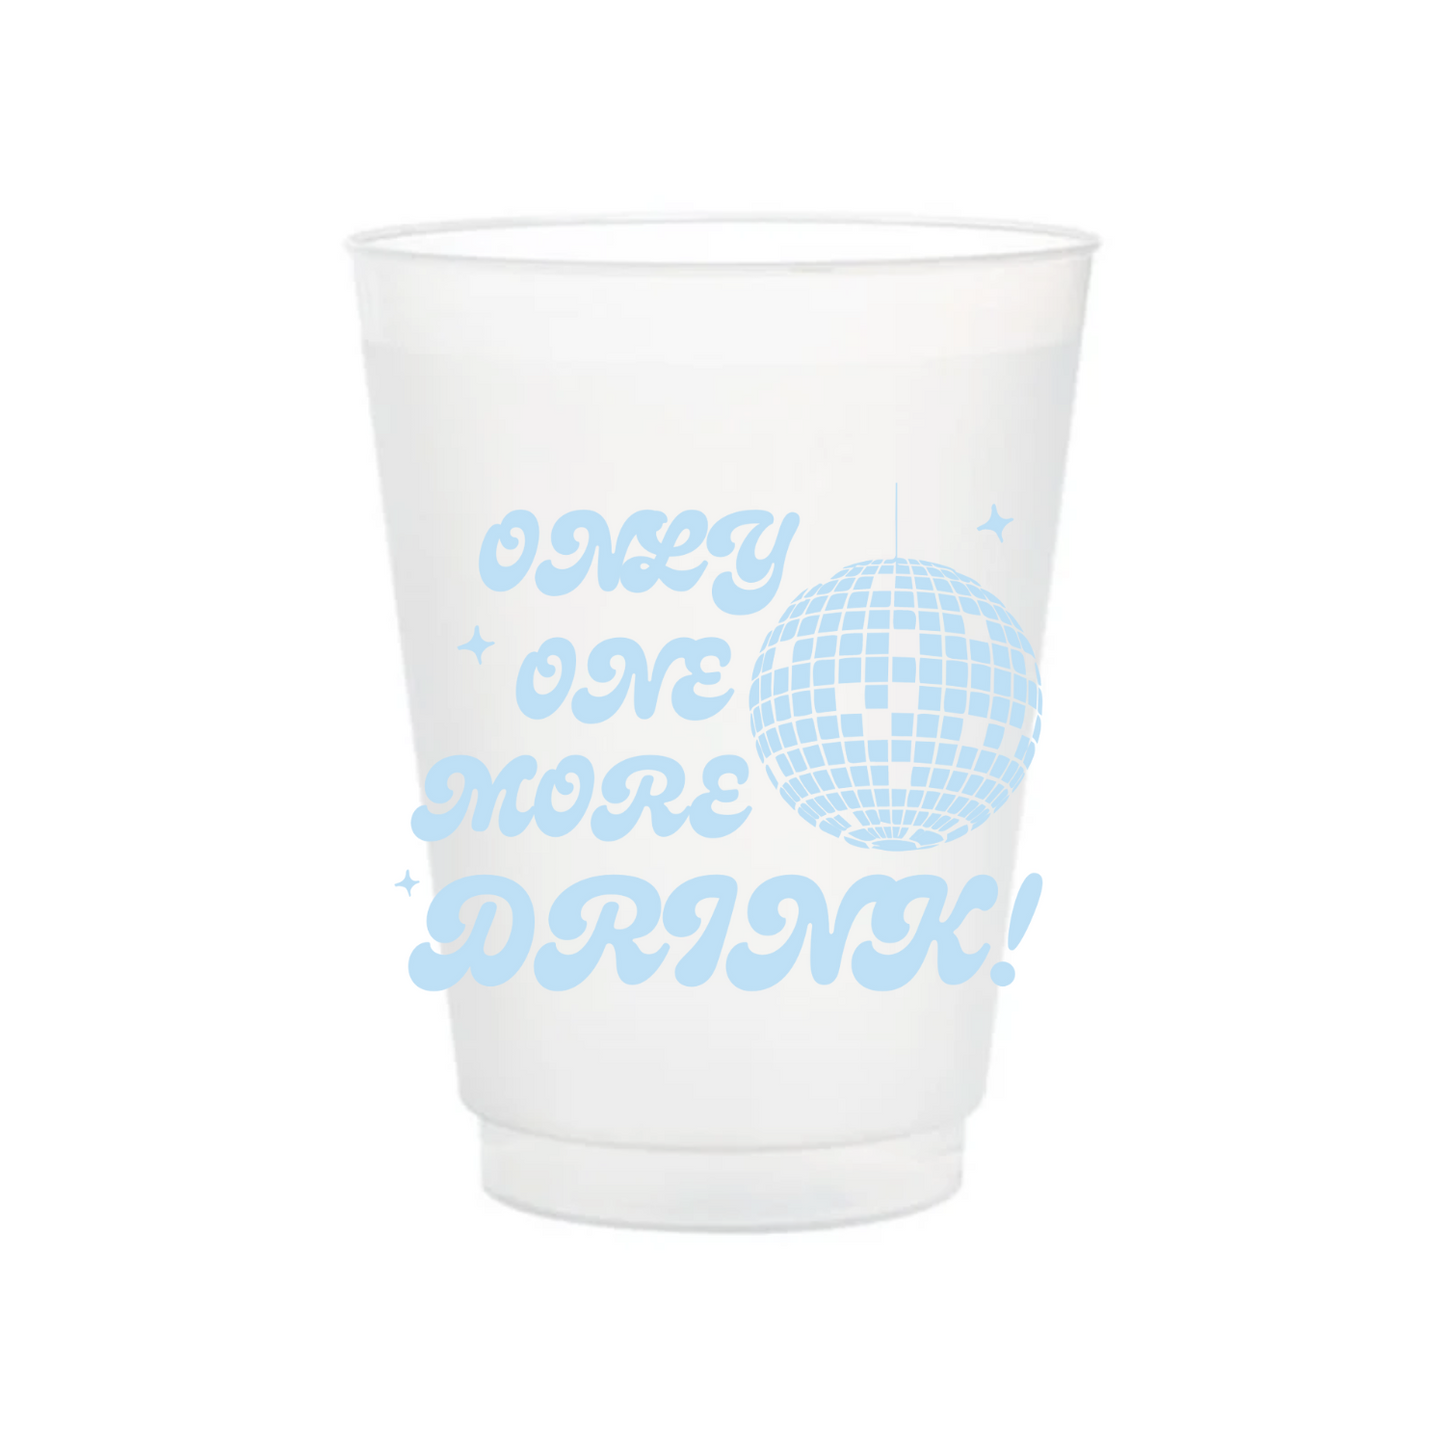 Only One More Drink! Reusable Cups